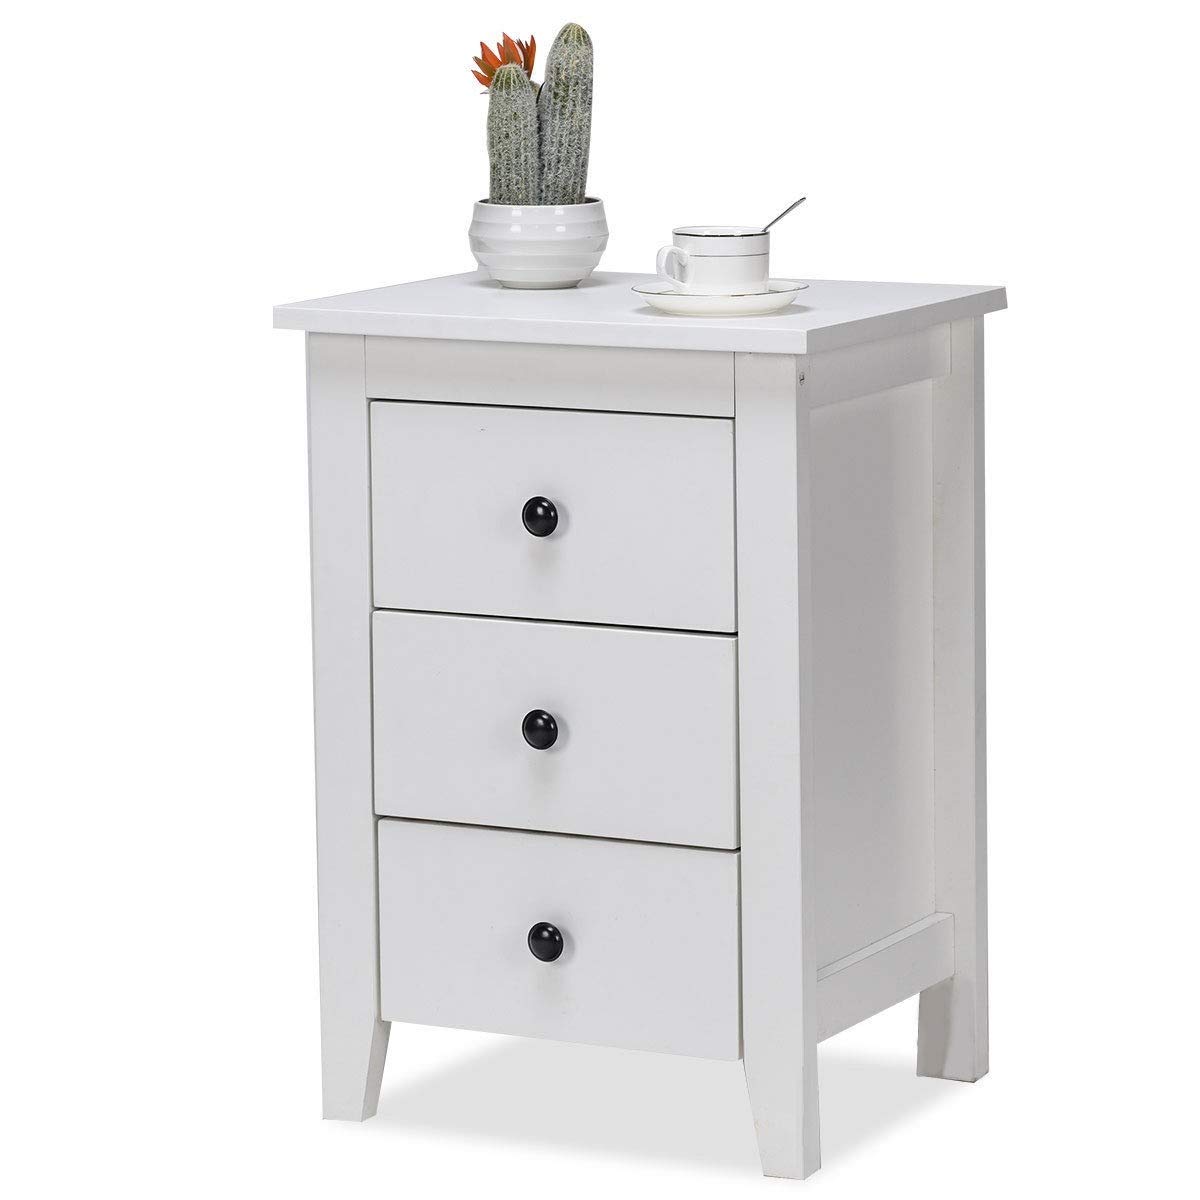 nightstand side end tables waterjoy modern accent table white with drawers drawer cabinet for bedroom living room kitchen dining bedside lamps usb hooper console slim drop leaf